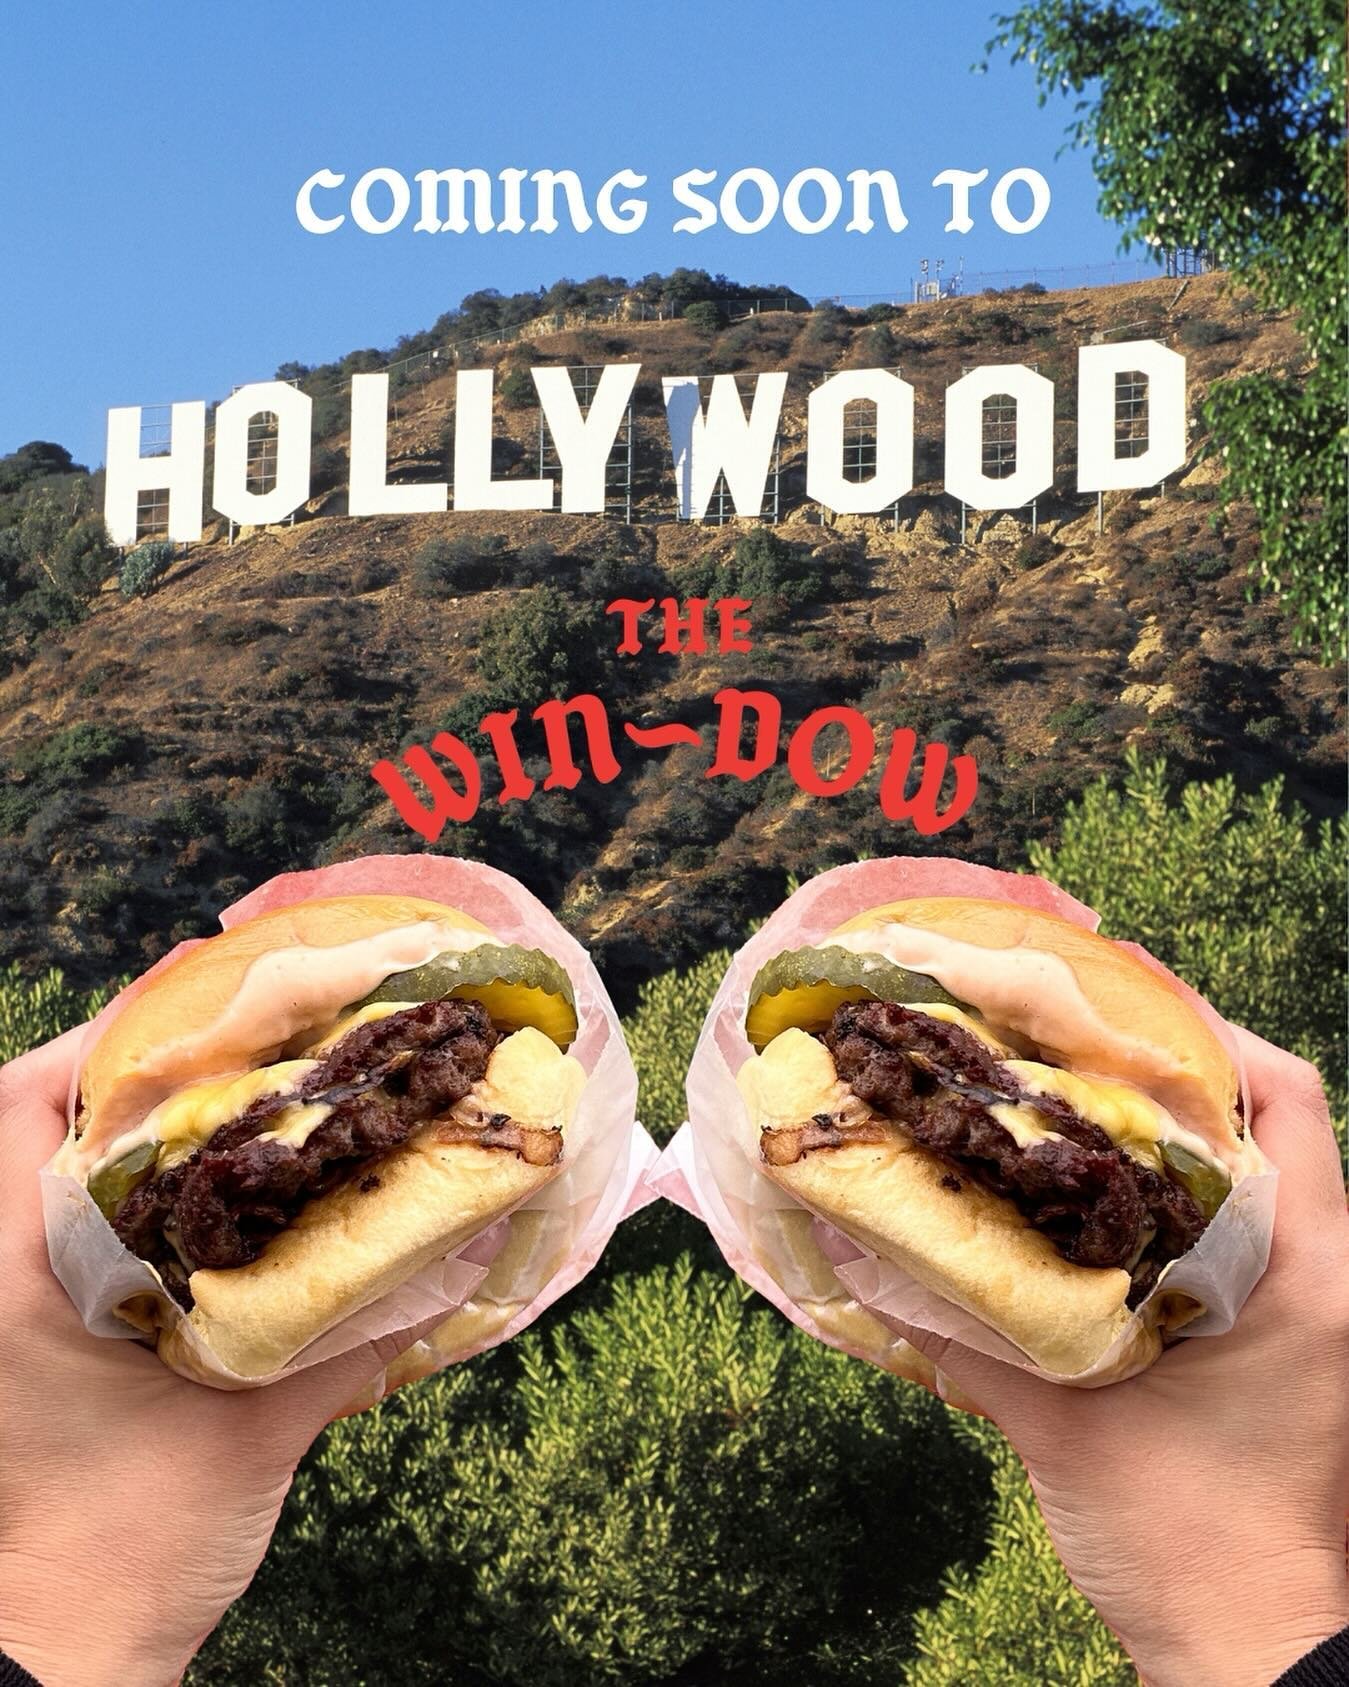 THE SECRET IS OUT ~ See you in Hollywood soon 🤭 
#thewindowla